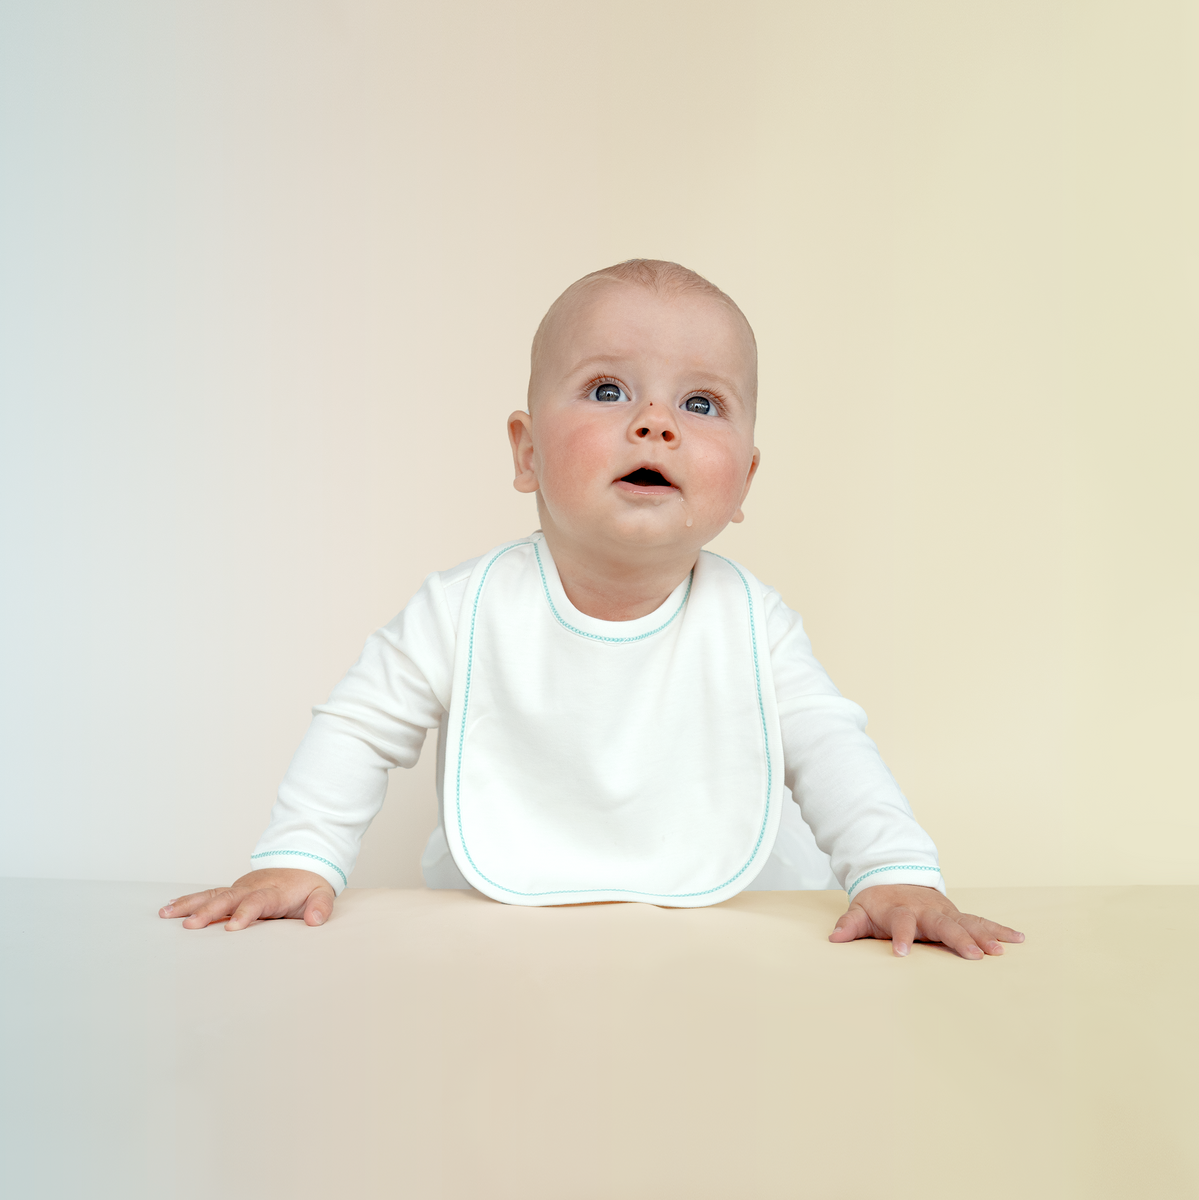 The Babysuit - Featured Image